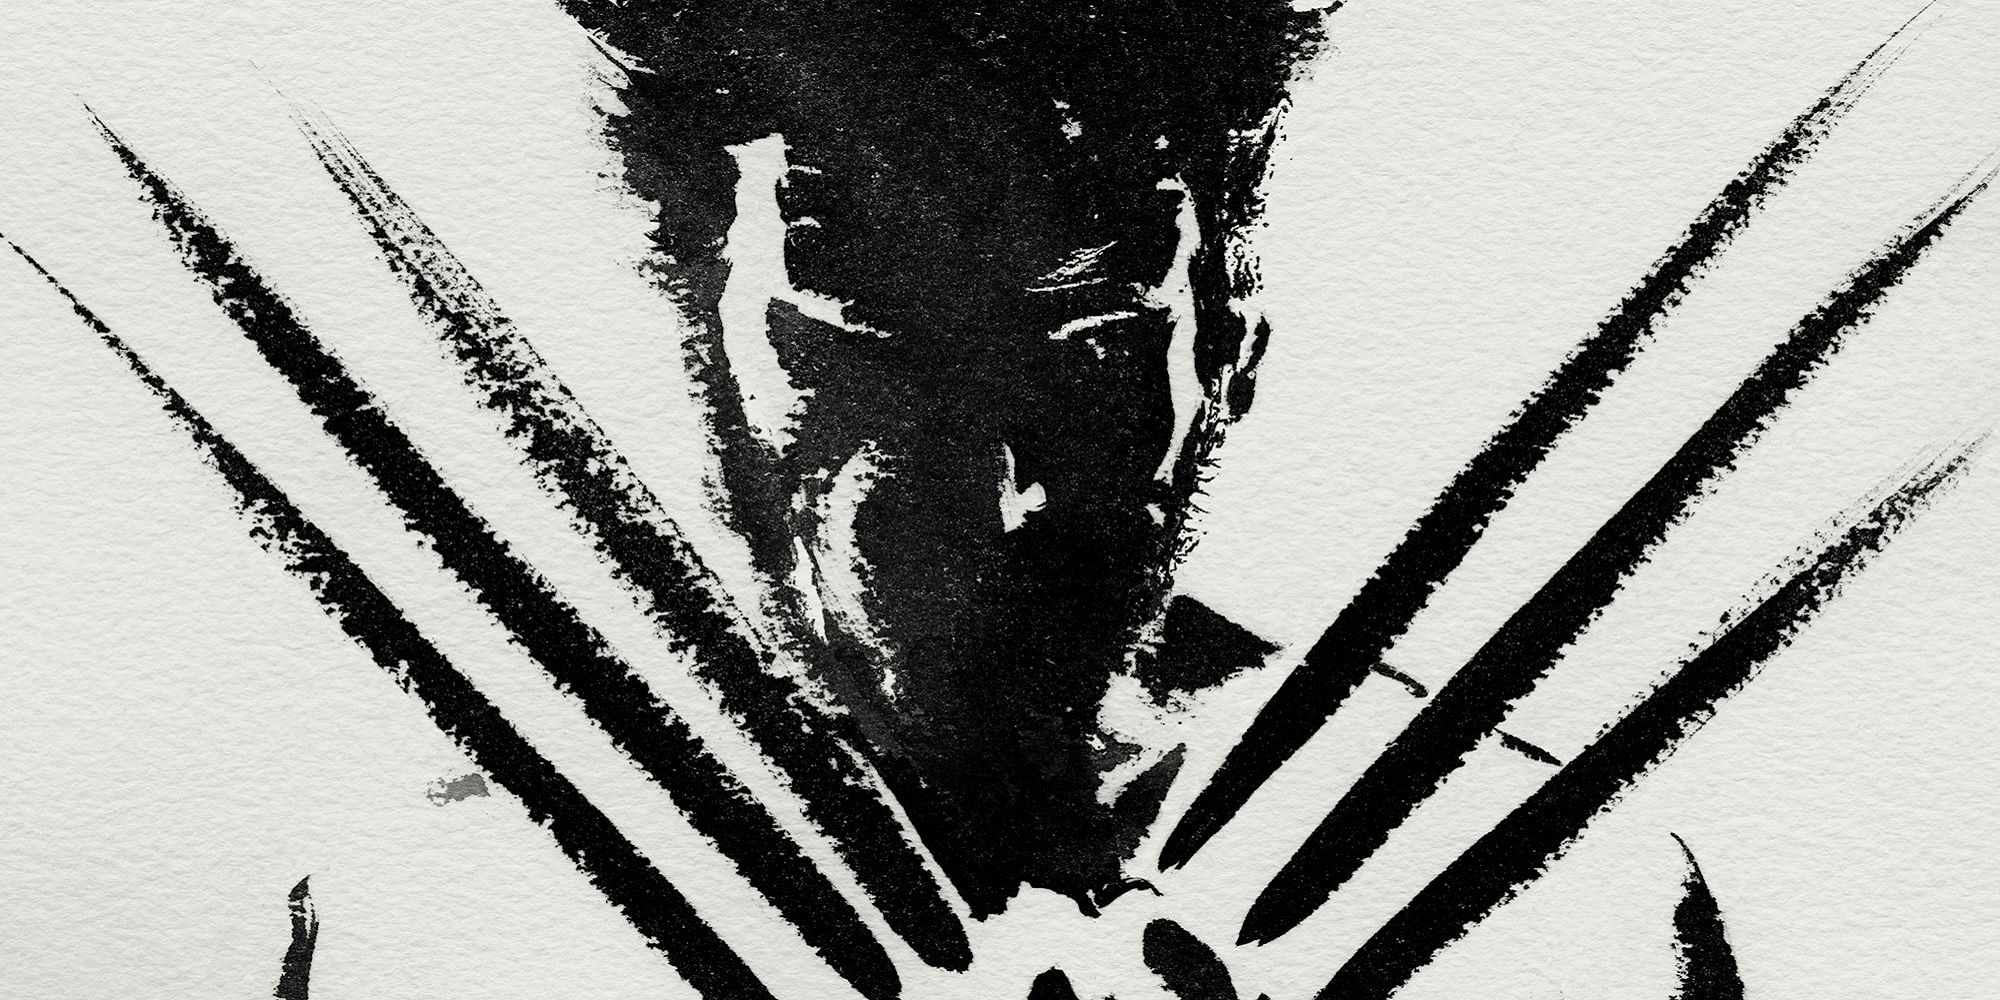 The Wolverine poster excerpt